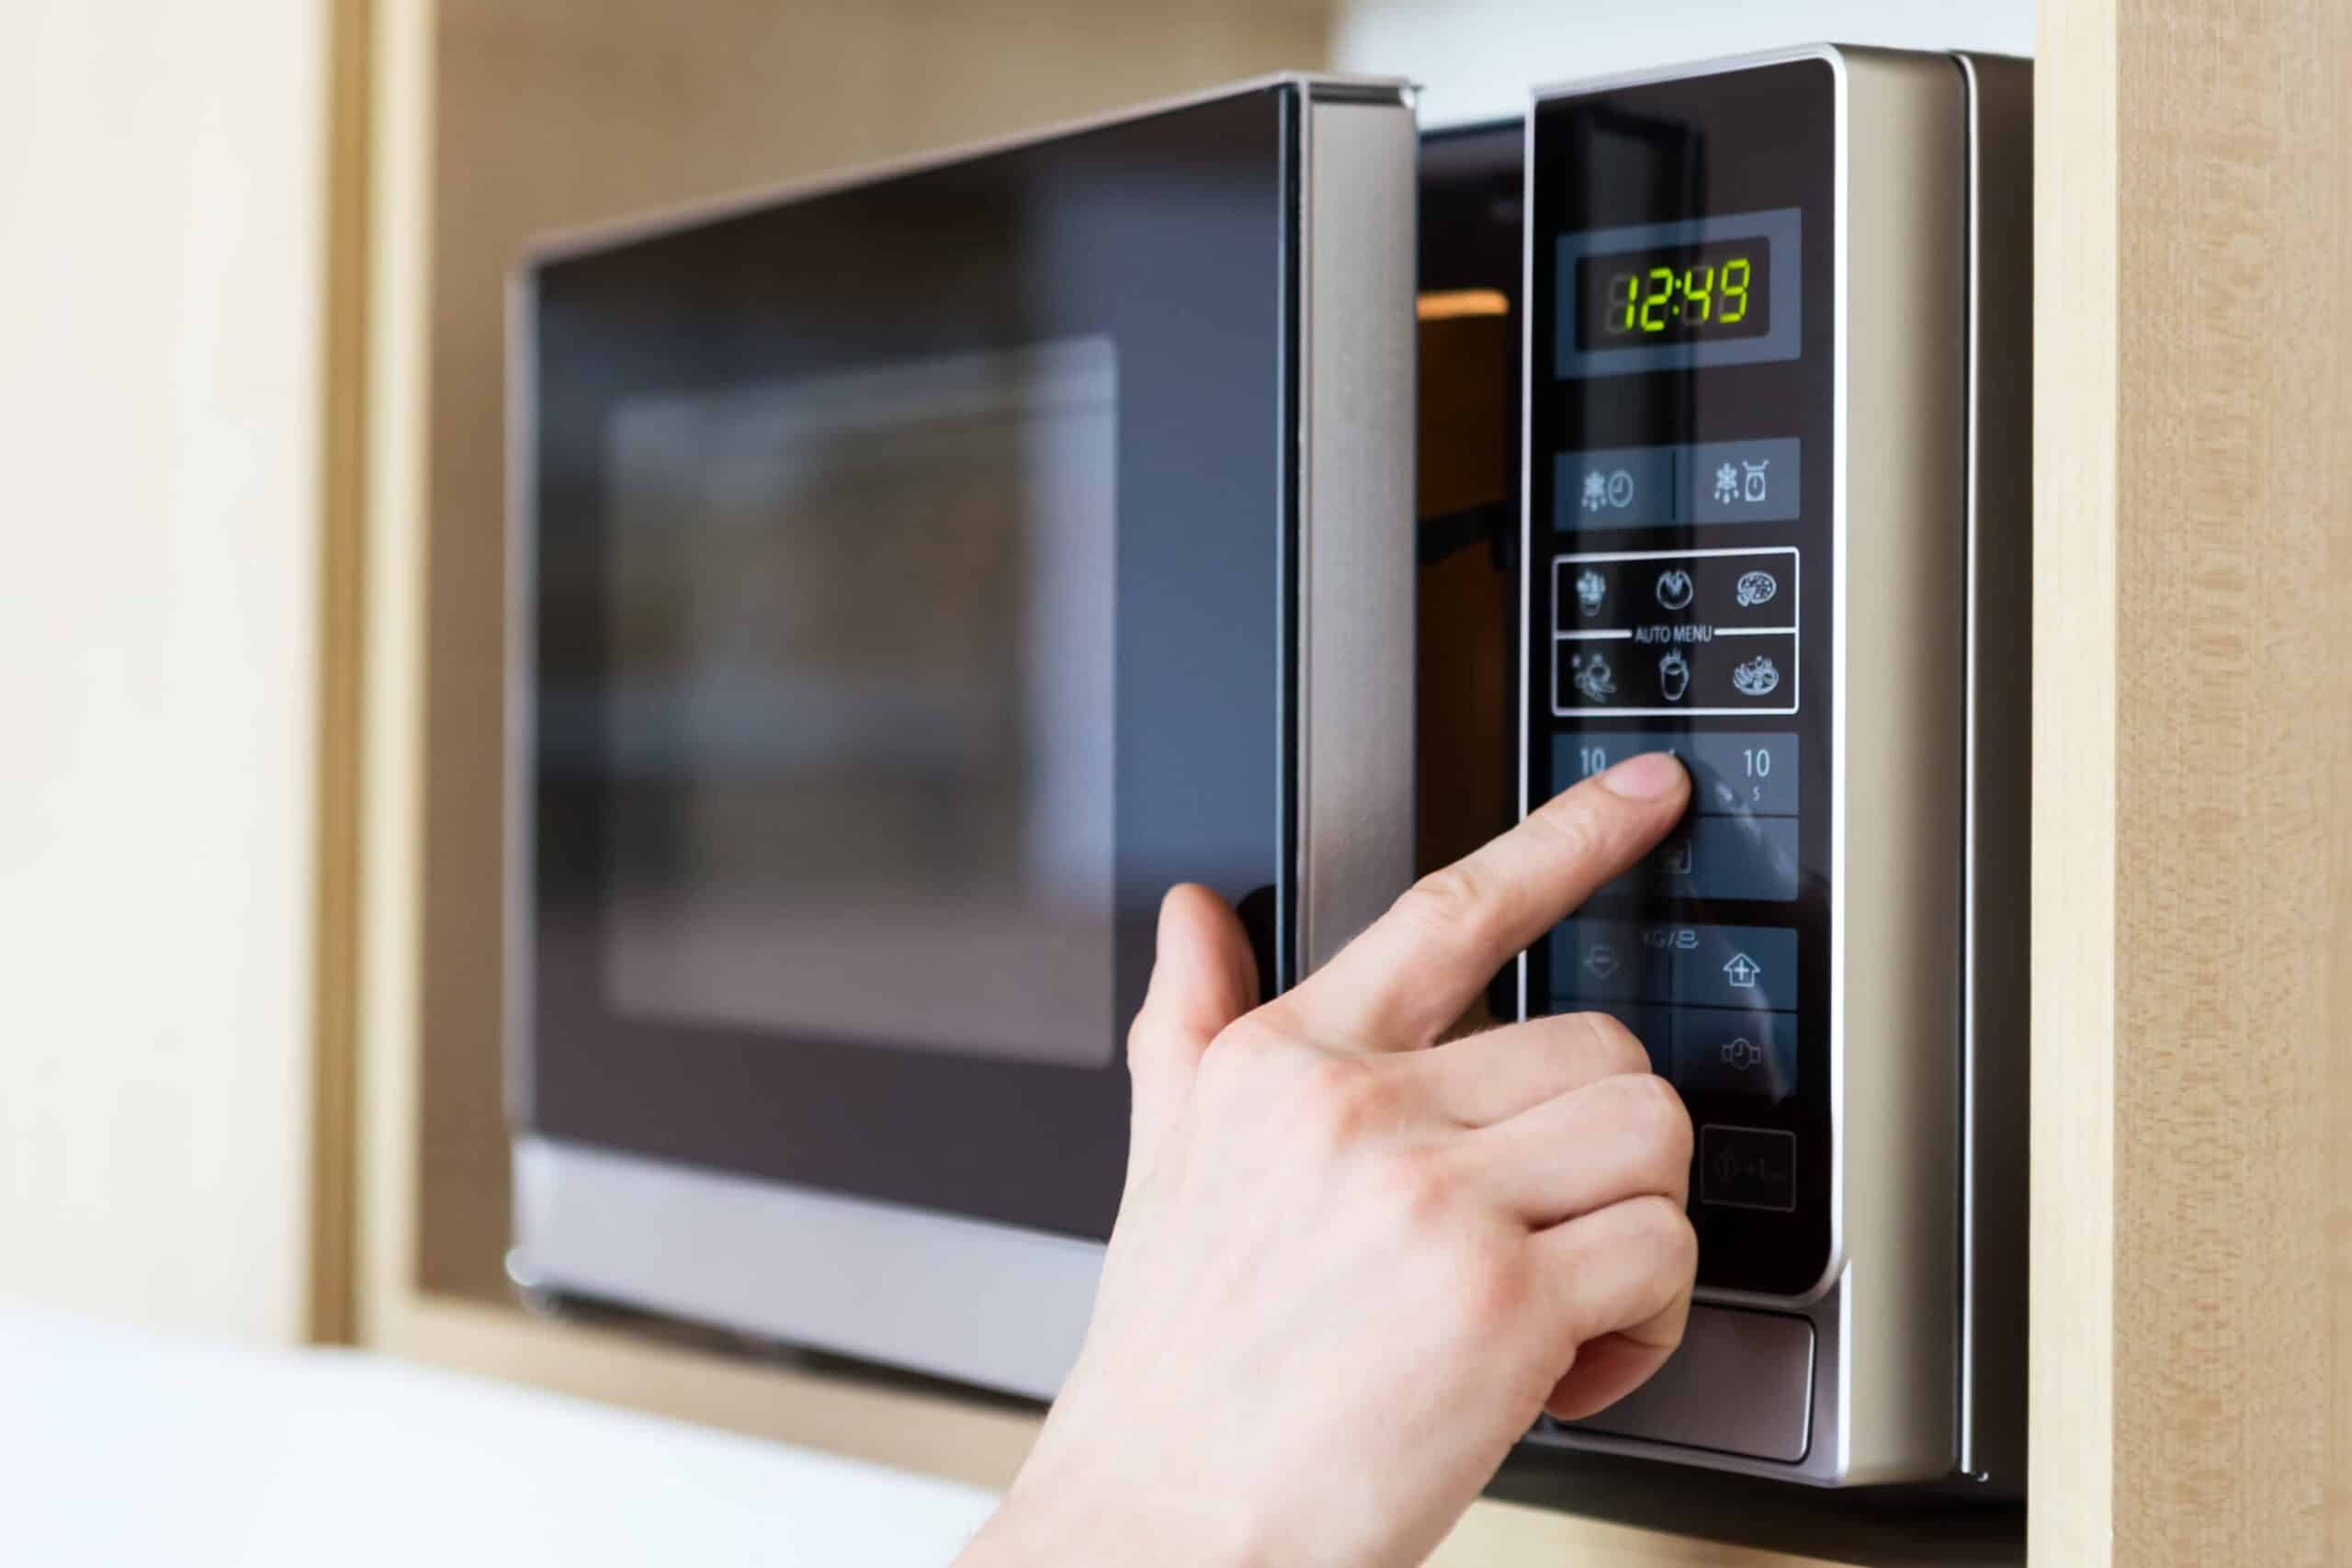 The Best Countertop Microwave for Your Family, According to